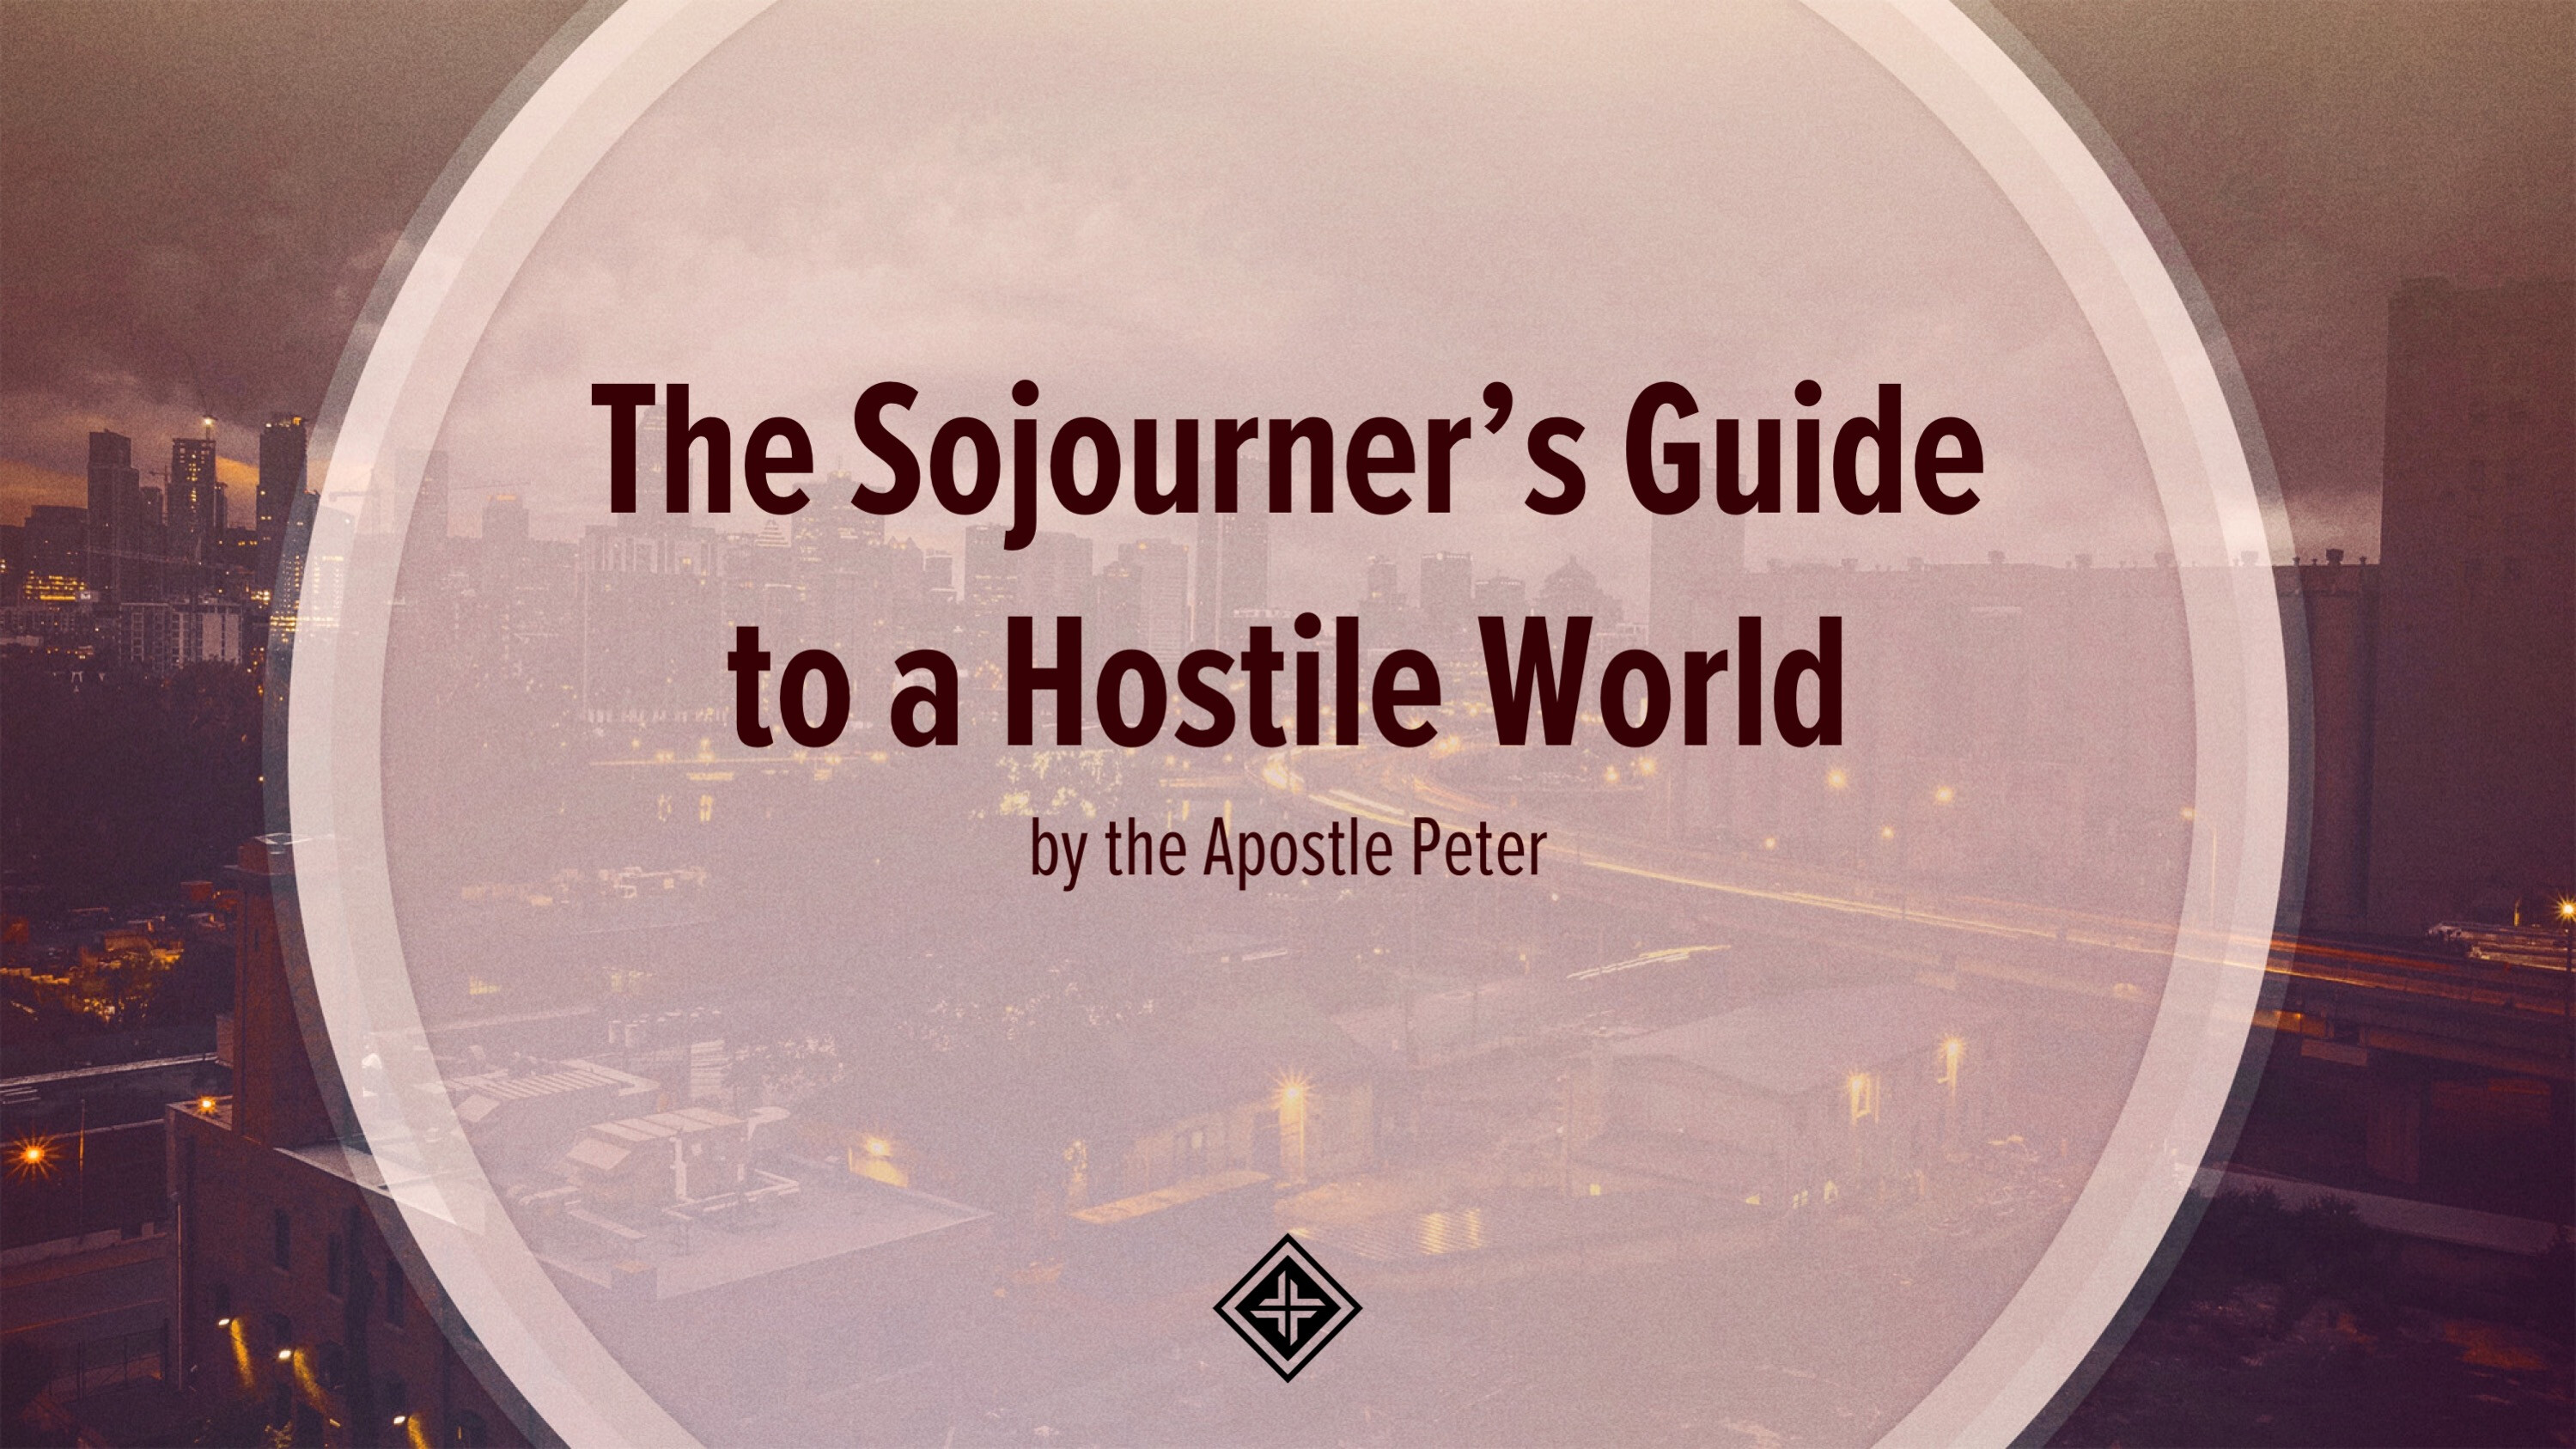 The Sojourner's Guide to a Hostile World